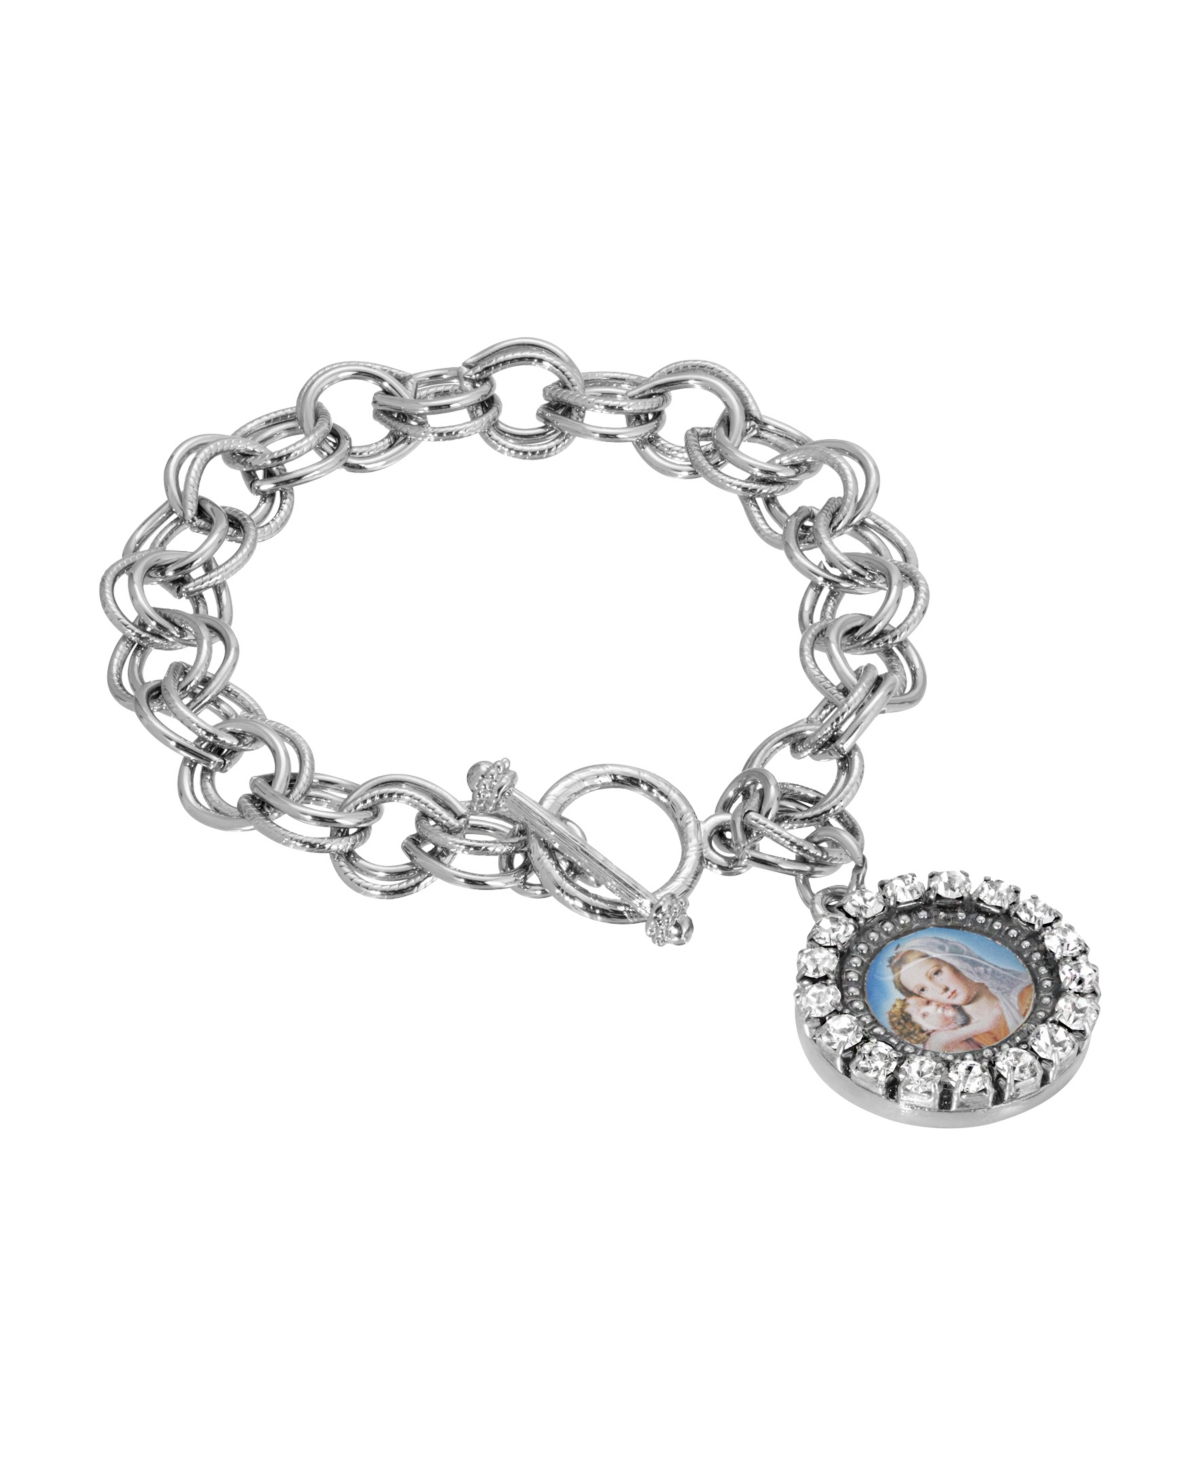 Silver-Tone Toggle Mary and Child Charm Bracelet - White